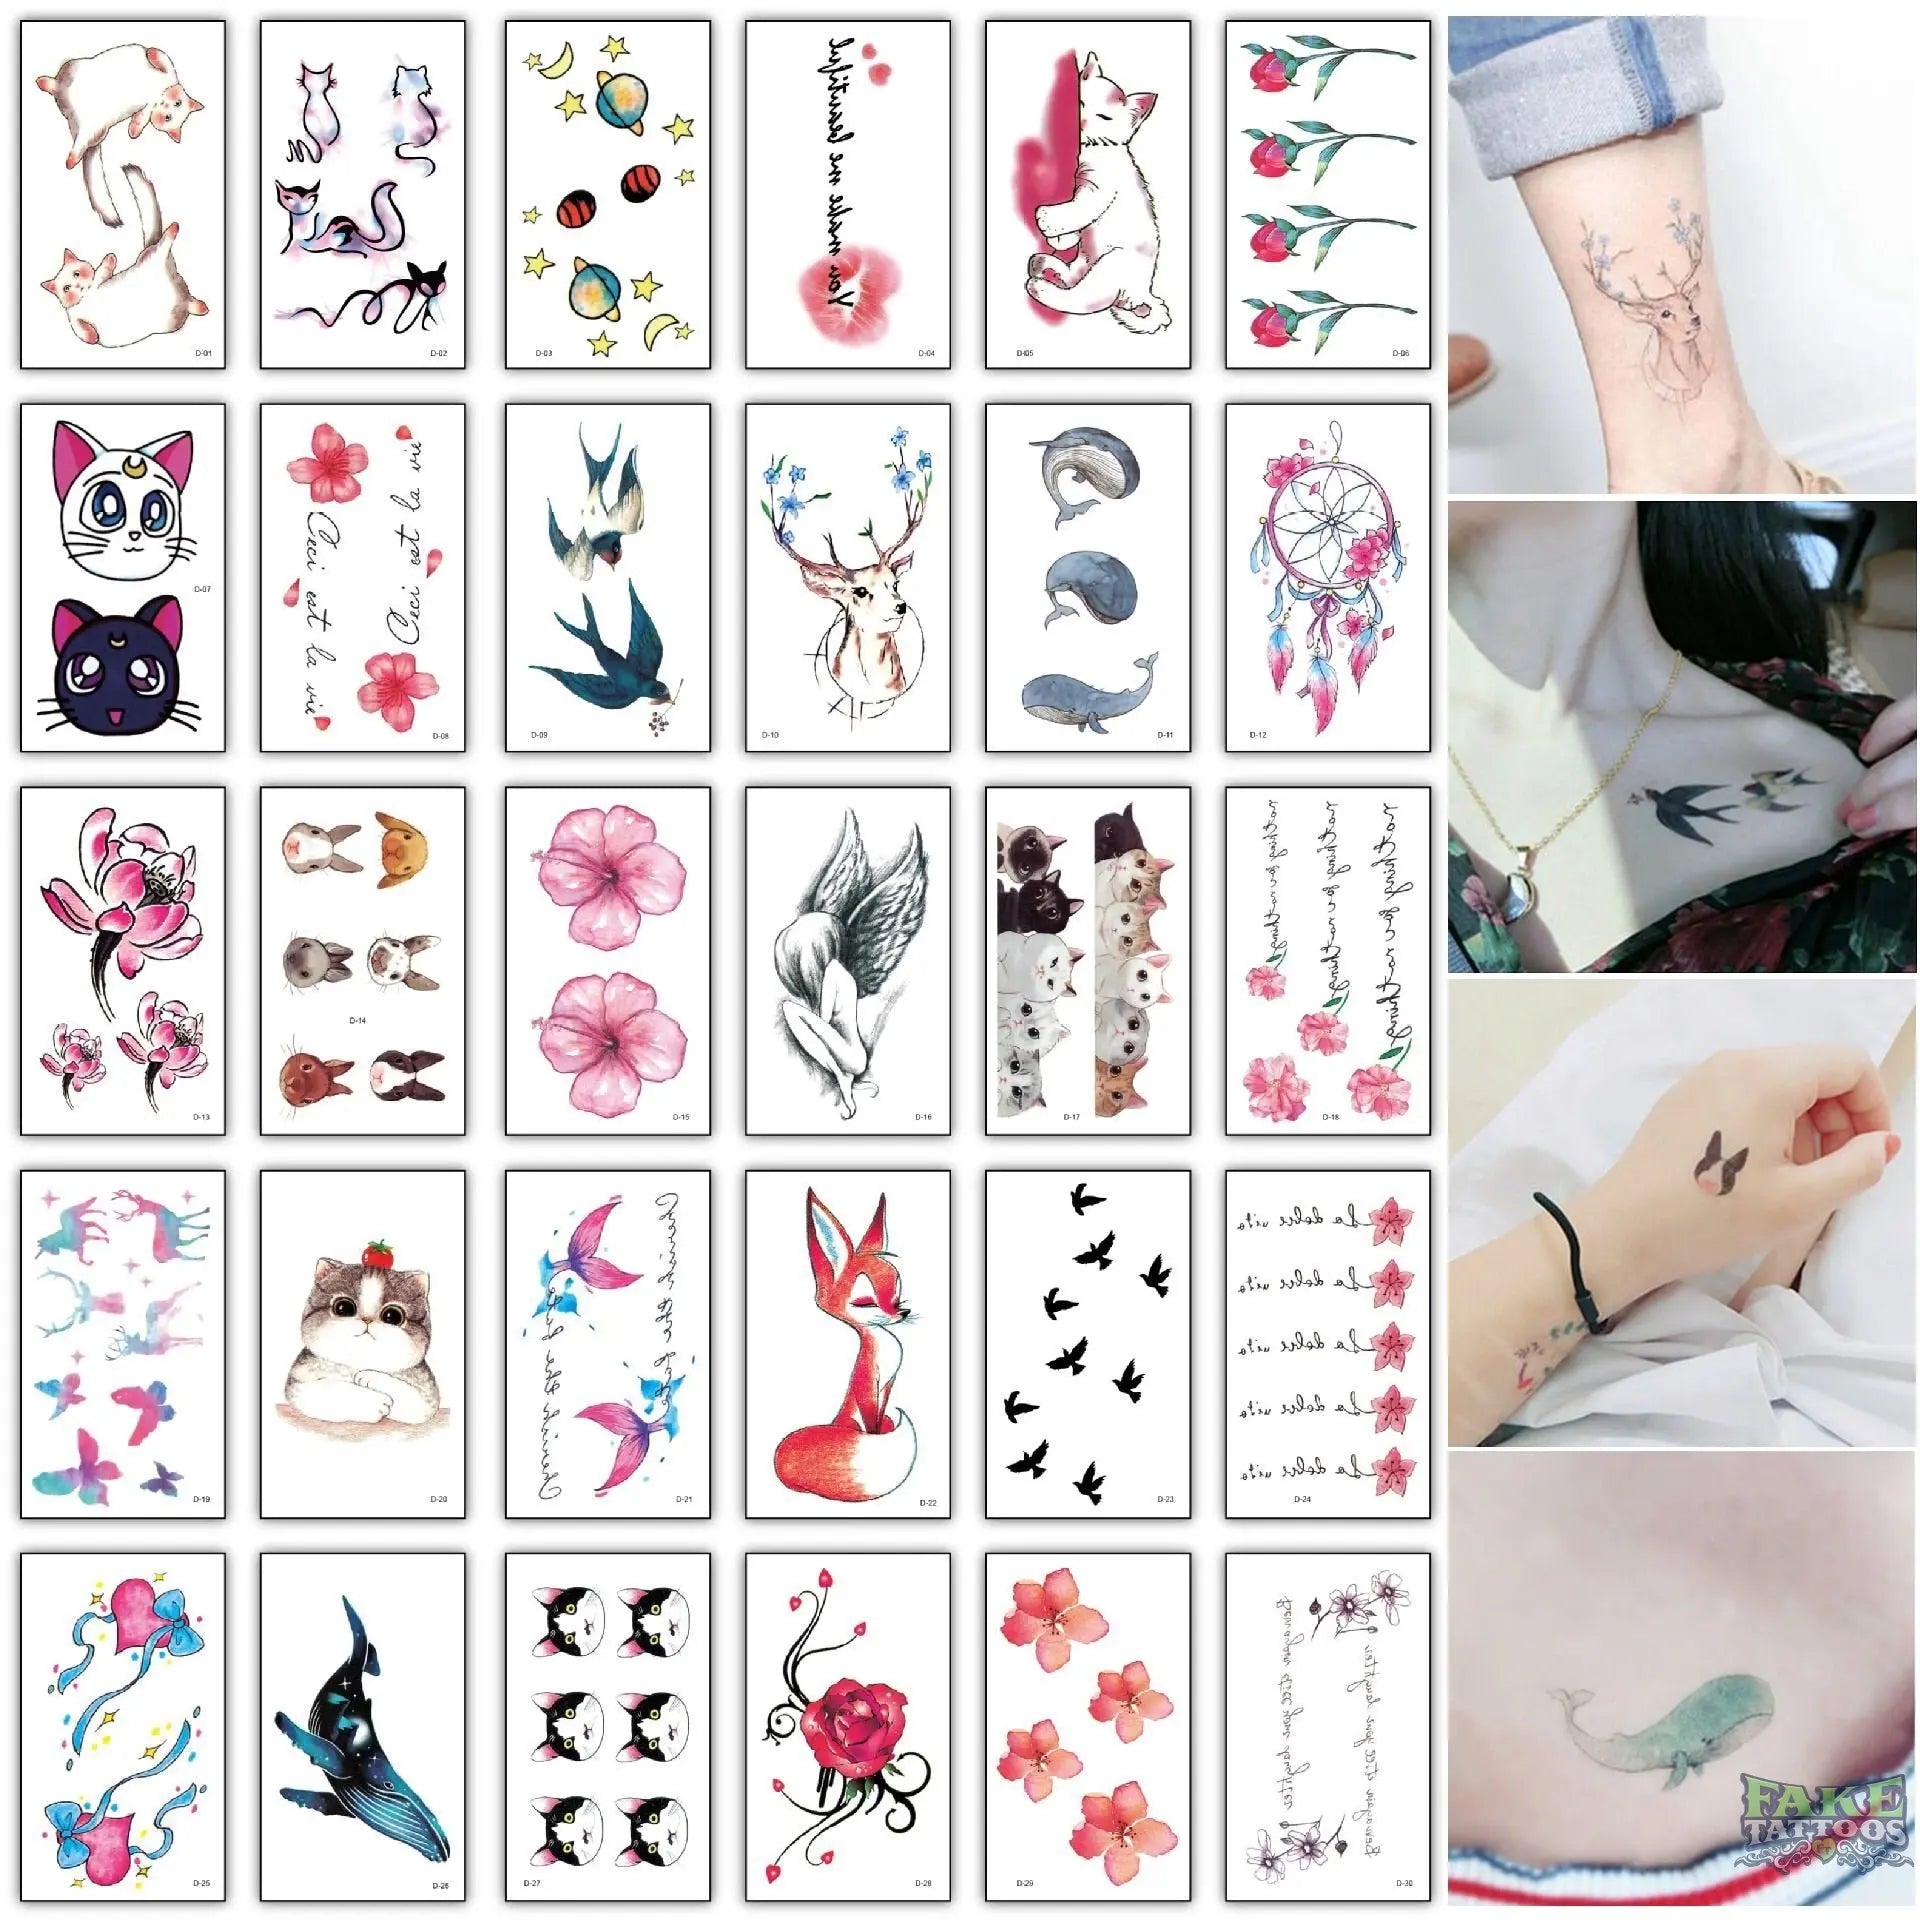 Temporary Tattoos Stickers For Women Adult Kids 12 Sheets Small Pattern  Water Transfer Stencils Waterproof Fingers Hands Sticker - Temporary Tattoos  - AliExpress